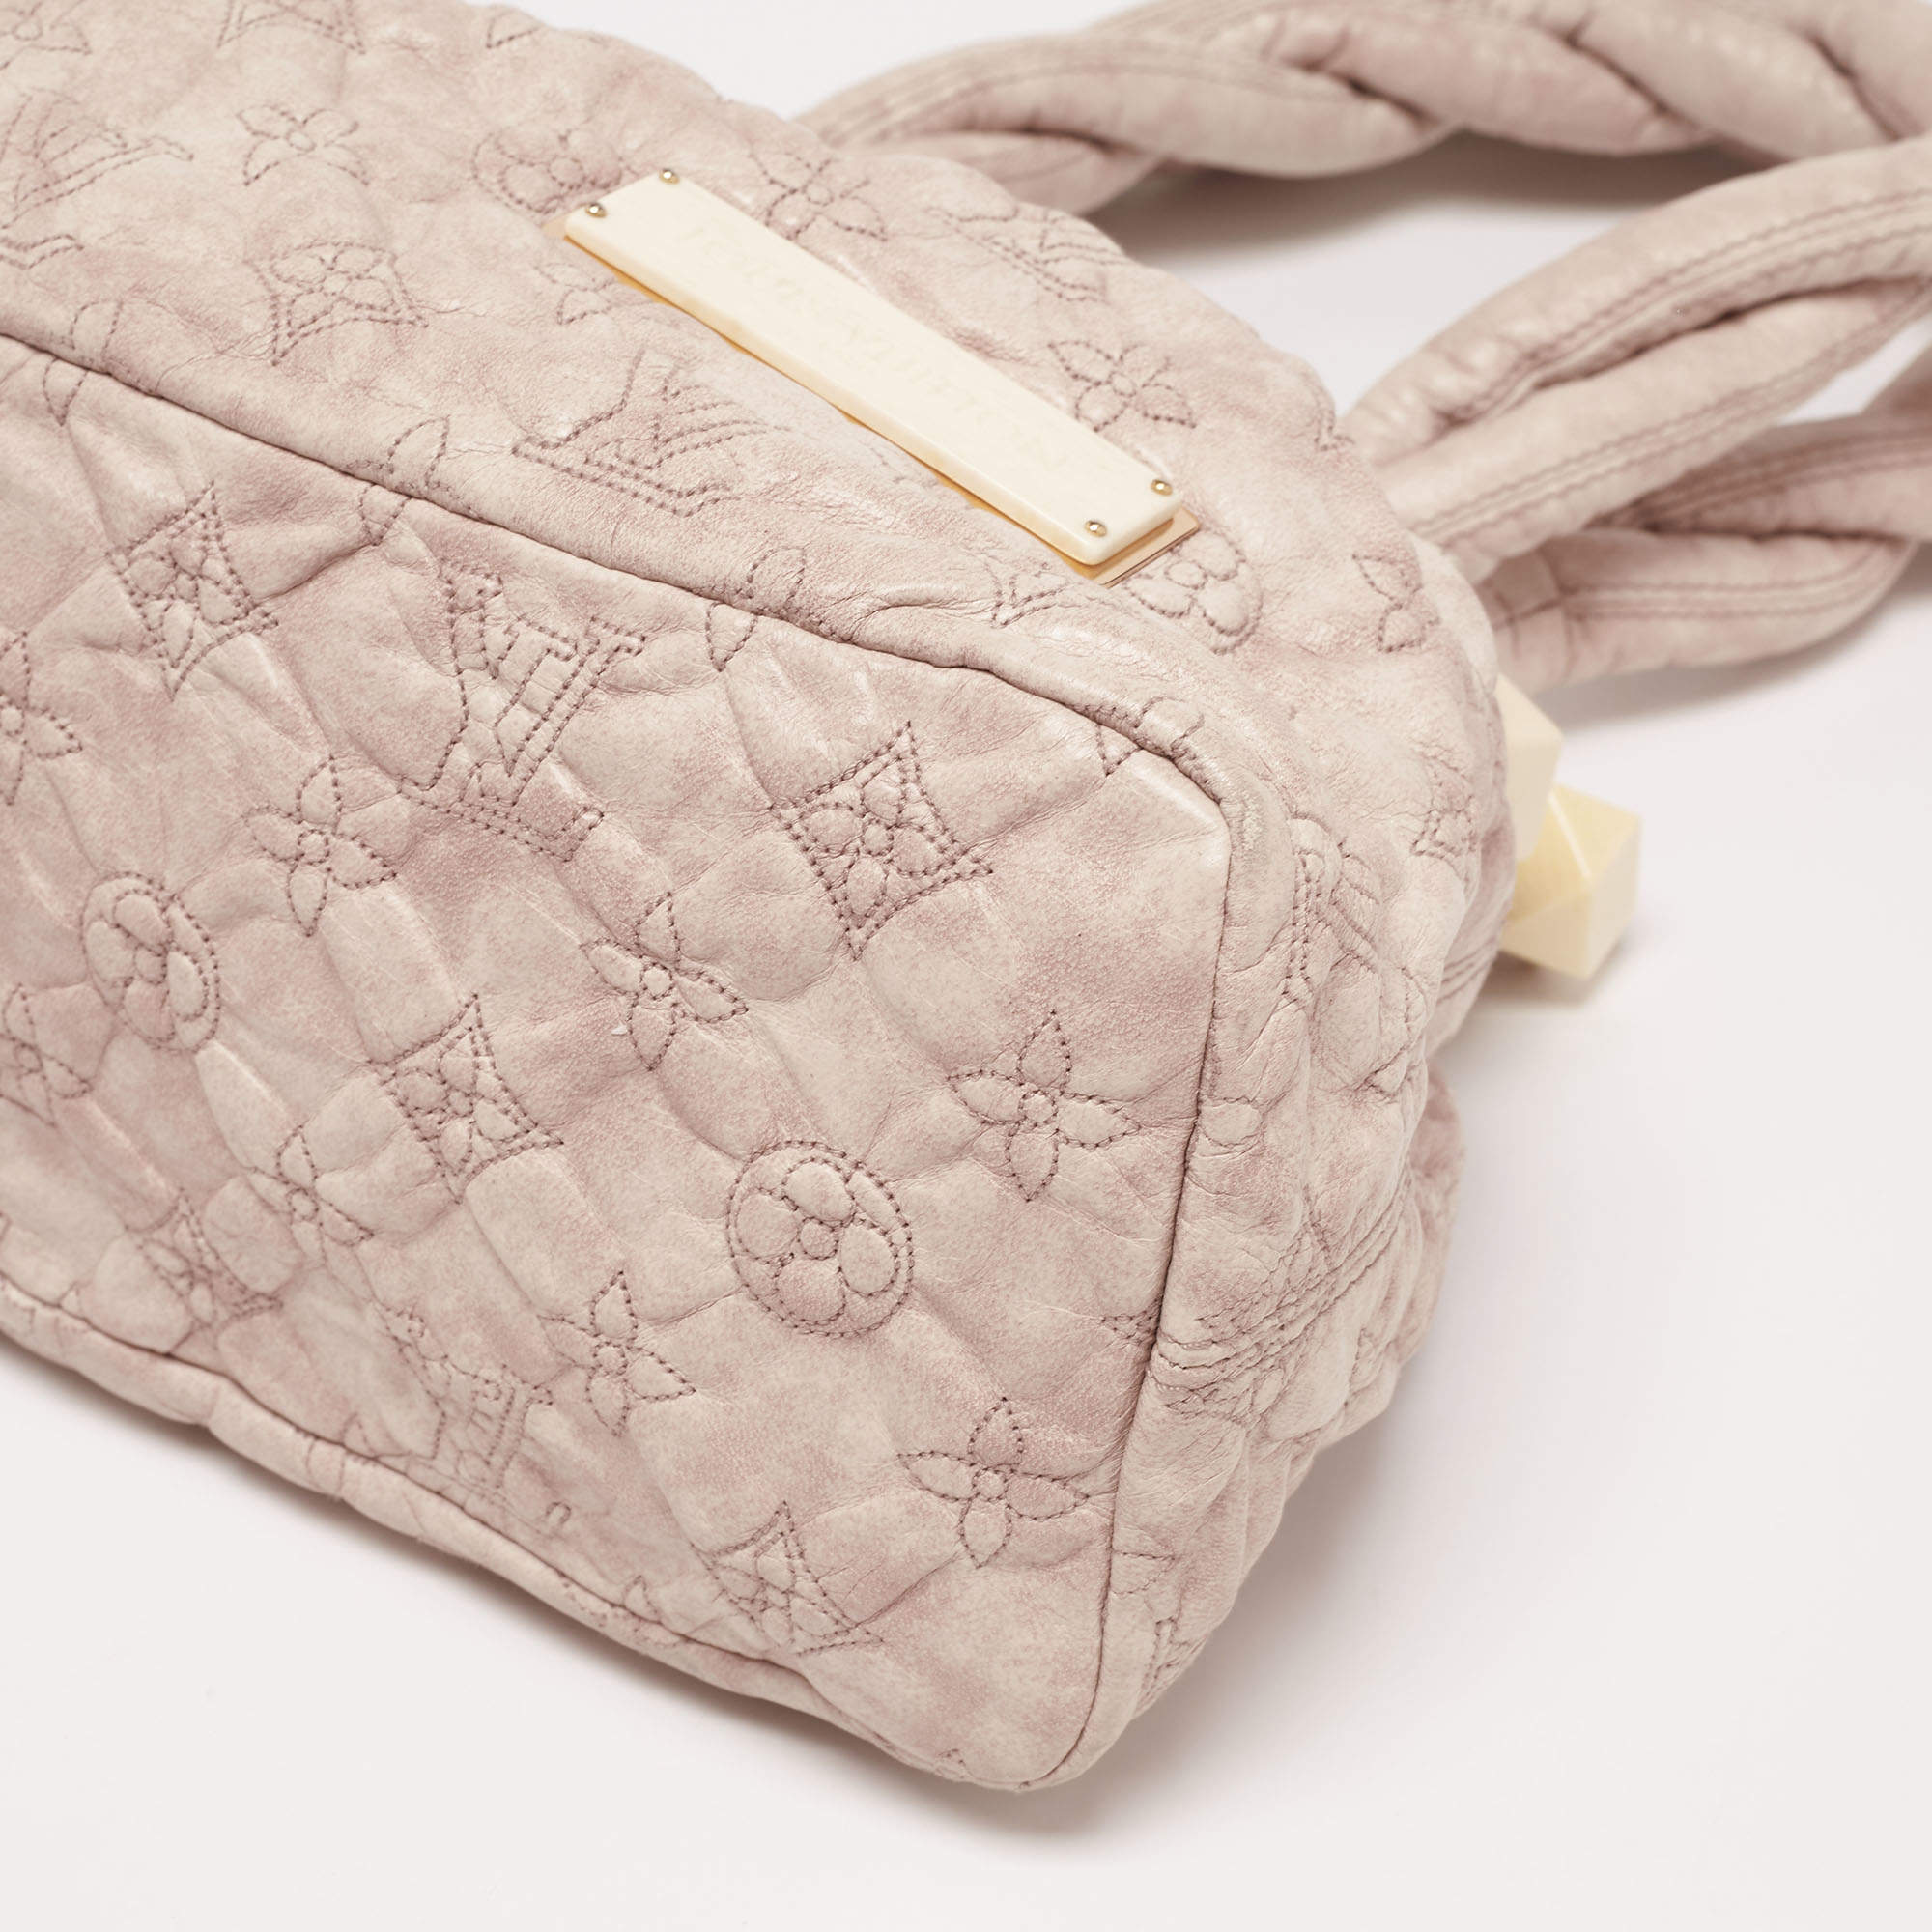 Lv Limited Edition Olympe Stratus Pm Beige Leather …